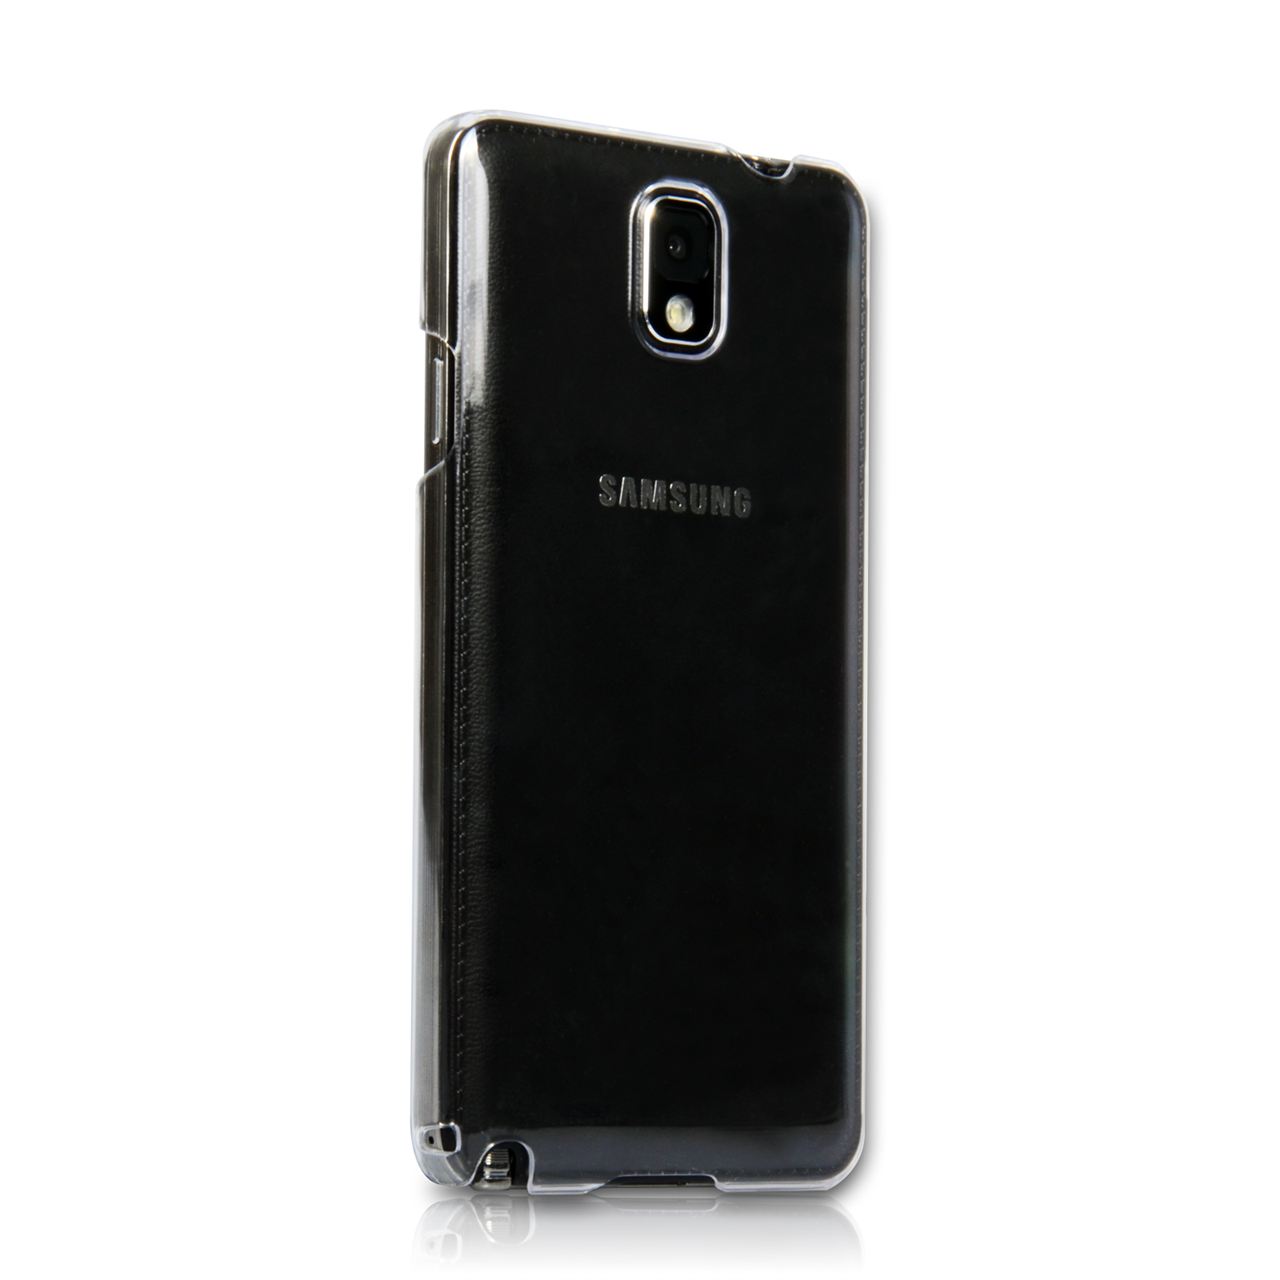 YouSave Accessories Samsung Galaxy Note 3 Crystal Clear Hard Case